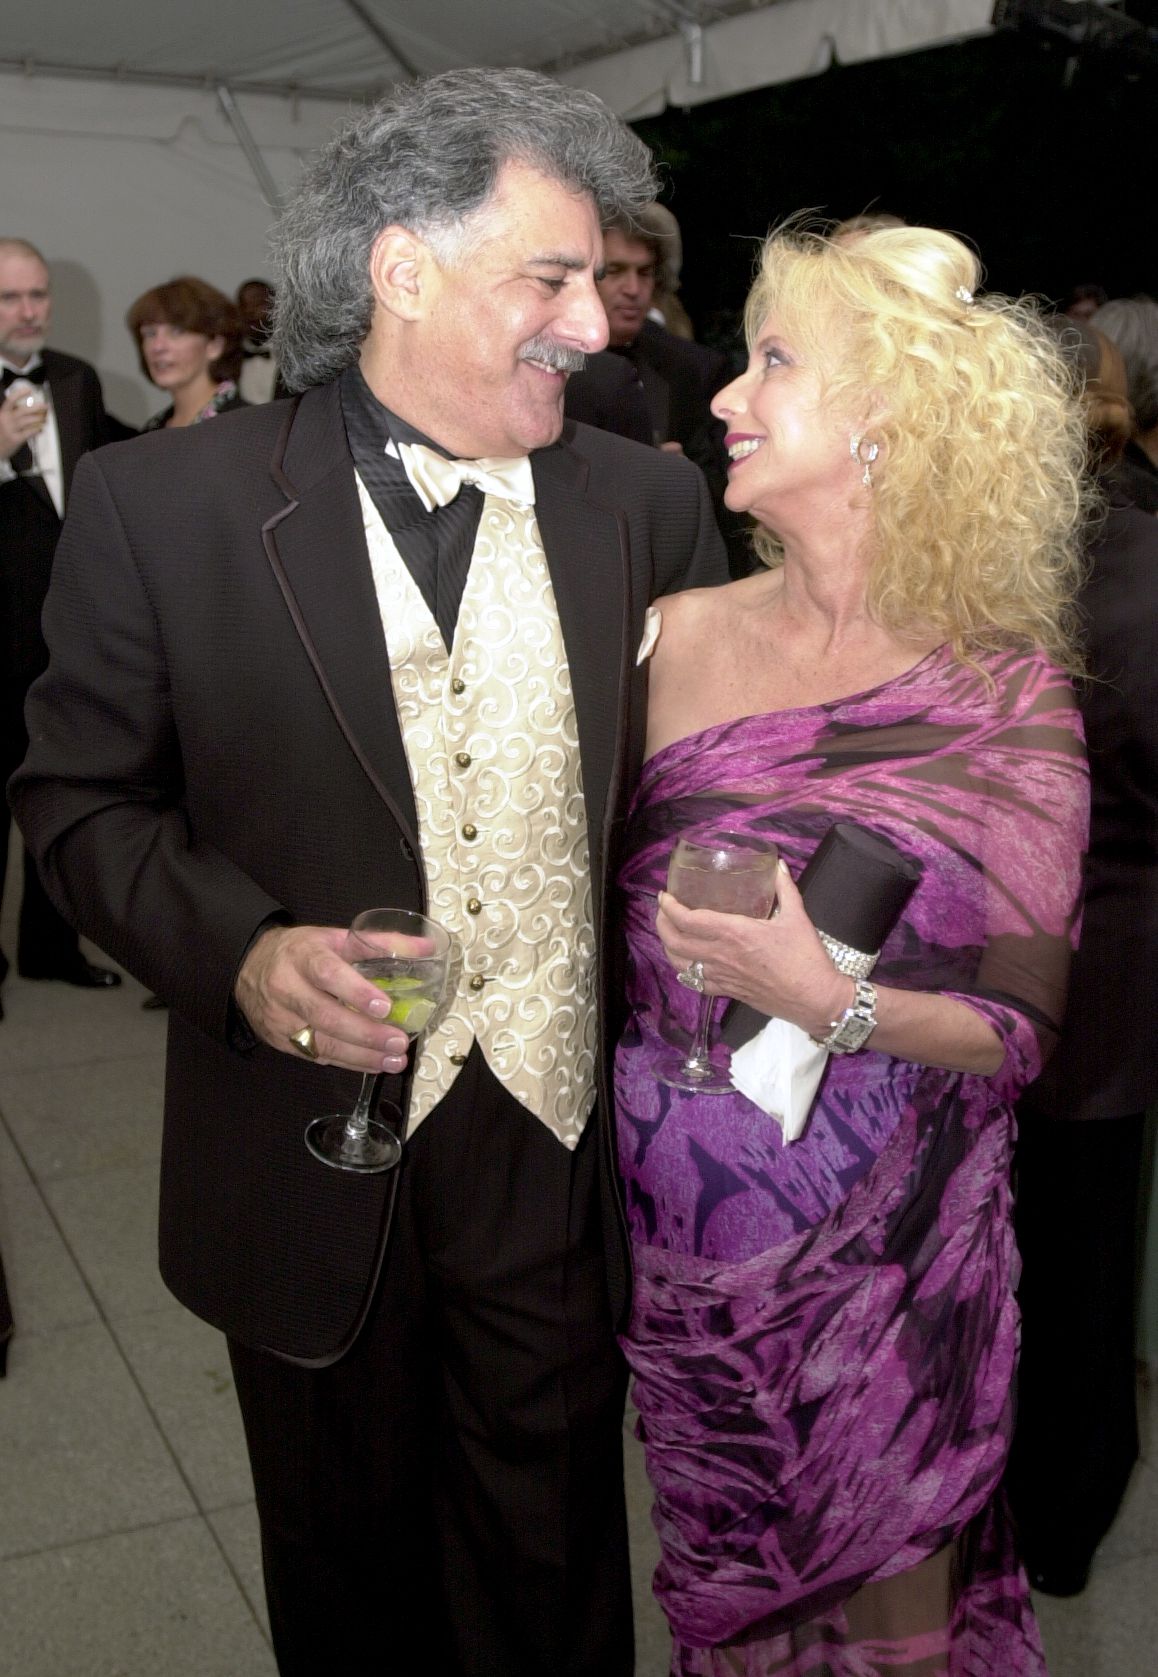 Martin Israel and Barbara Kaplan Israel at the Marshall Field’s sponsored fashion show and gala at the Museum of Contemporary Art in 1993.